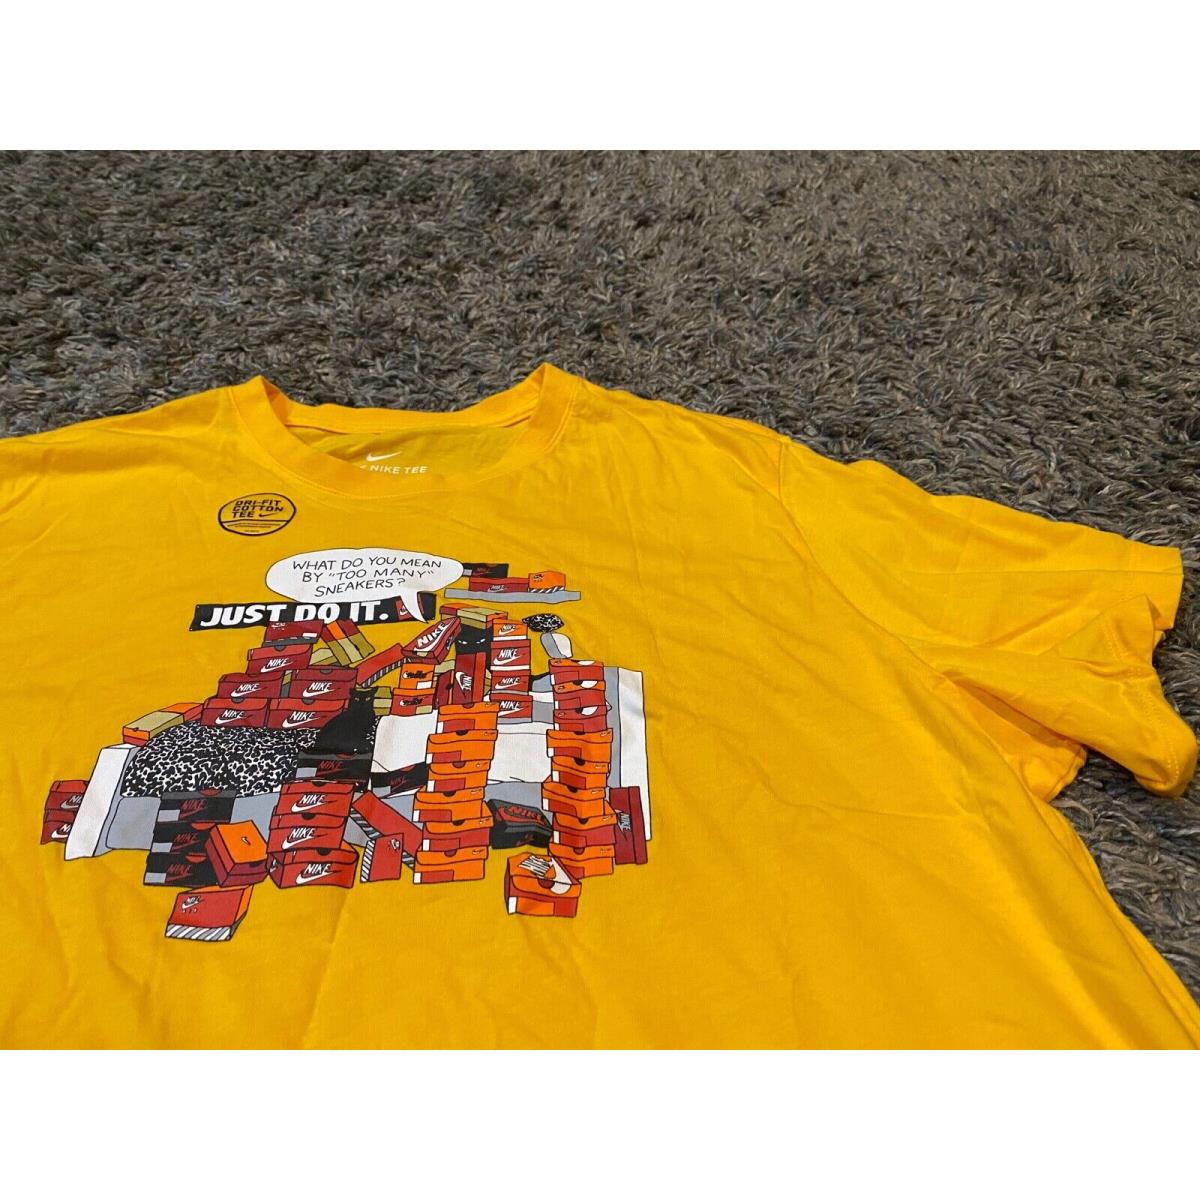 Nike Xxl Yellow Too Many Sneakers Shoe Boxes t Shirt Just Do It Black Cat MJ 23